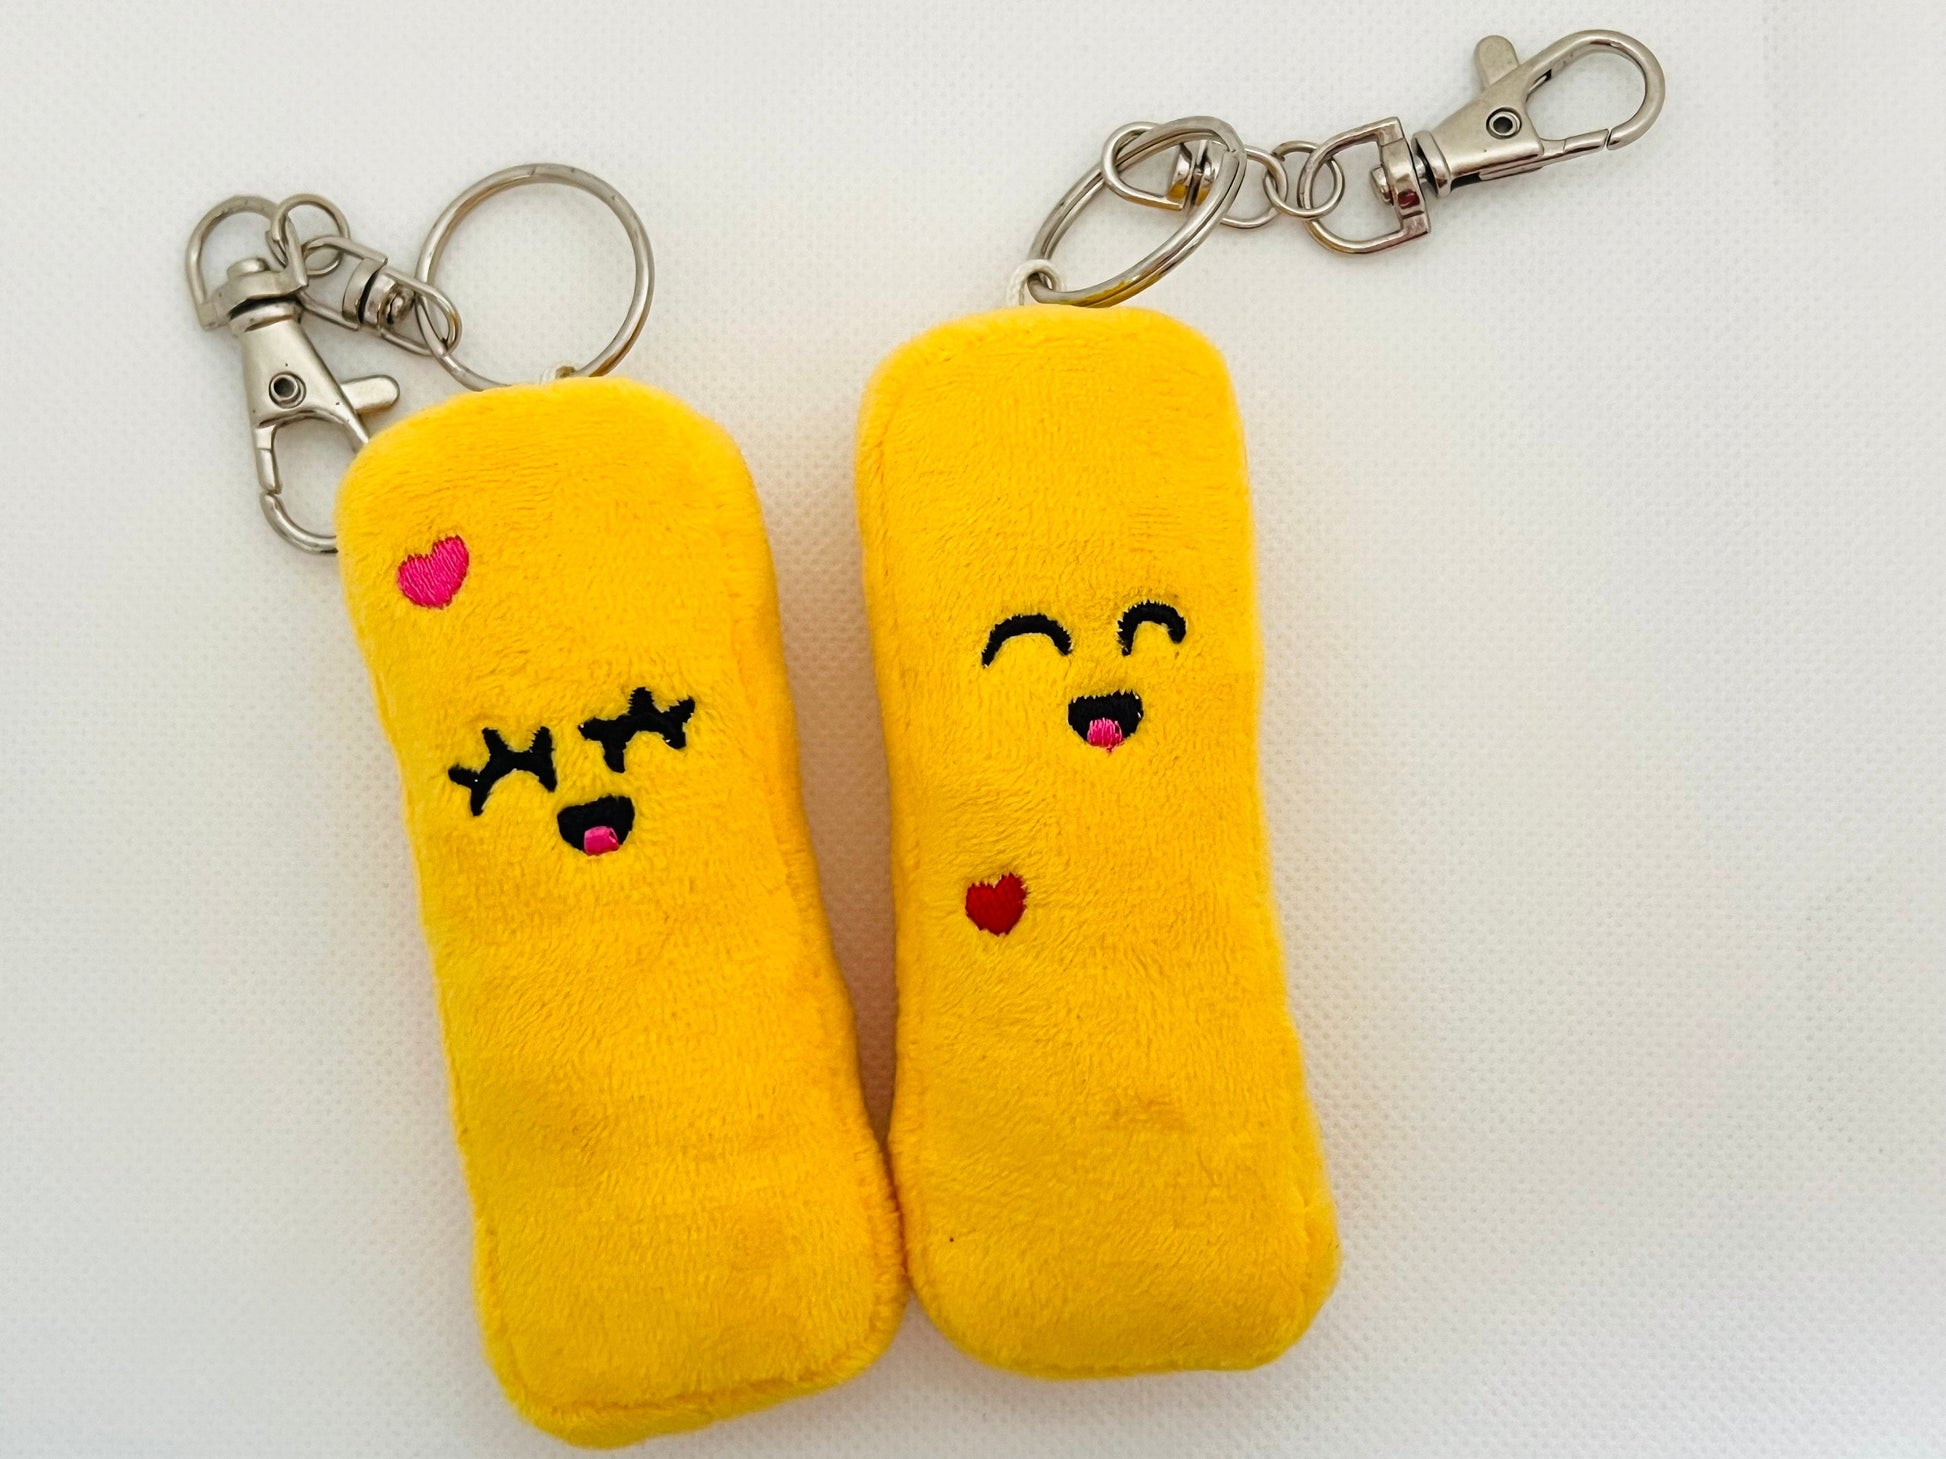 French Fry Plush Keychain designed by me